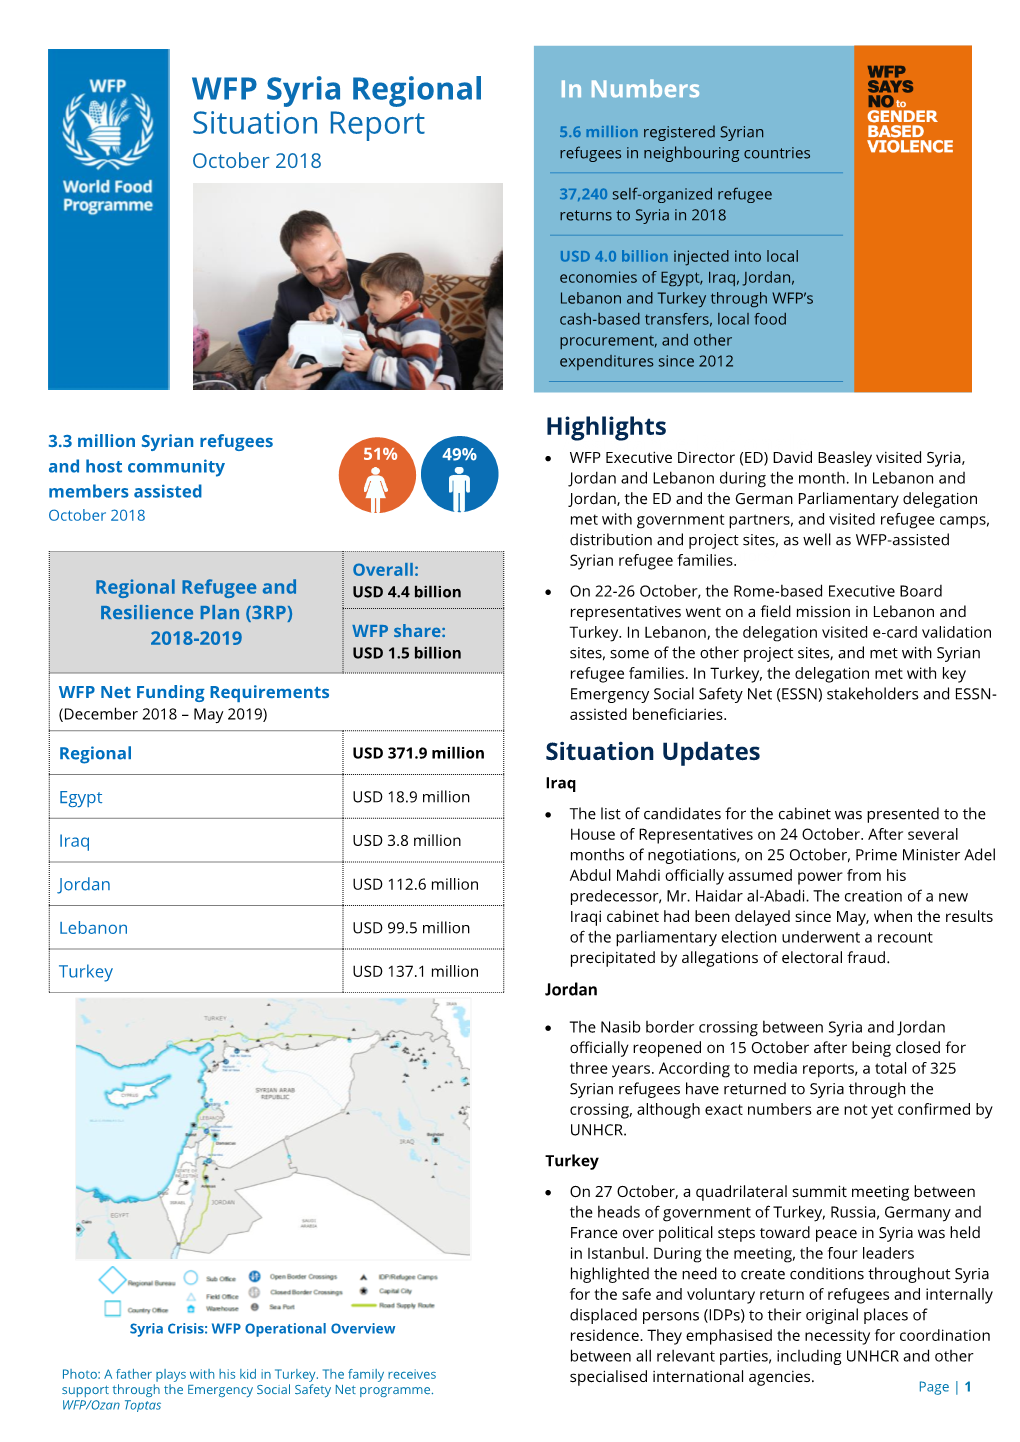 WFP Syria Regional Situation Report